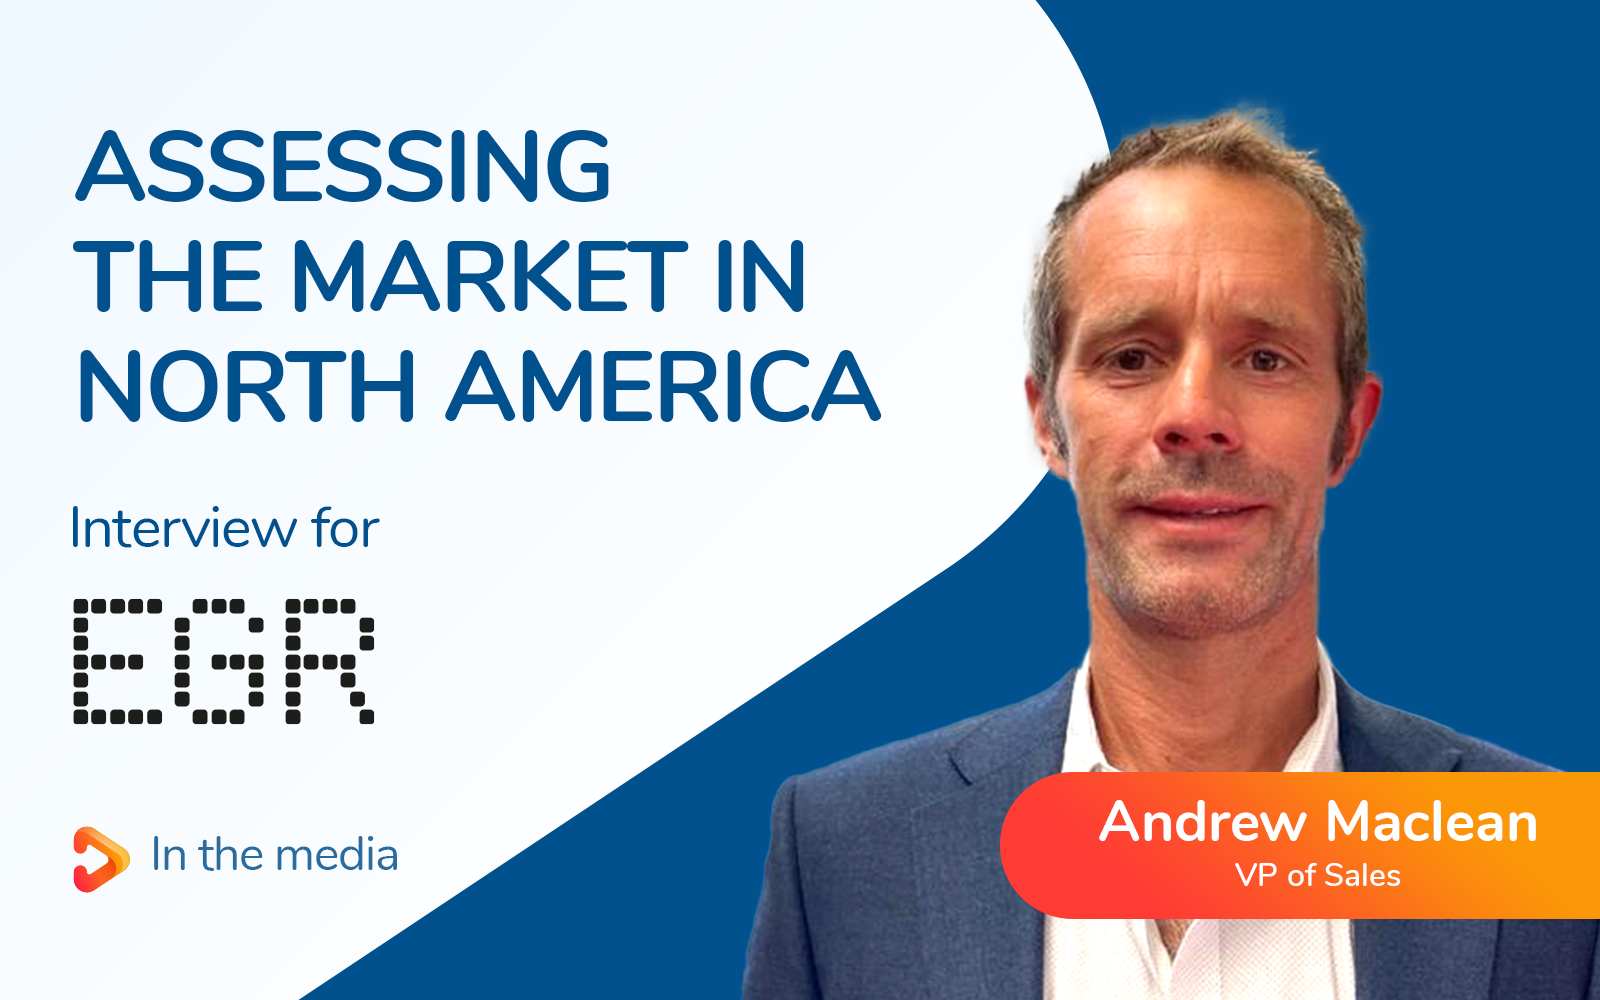 Andrew Maclean assessing the market in North America and concludes that there is plenty of reason for optimism, particularly for aggregators.